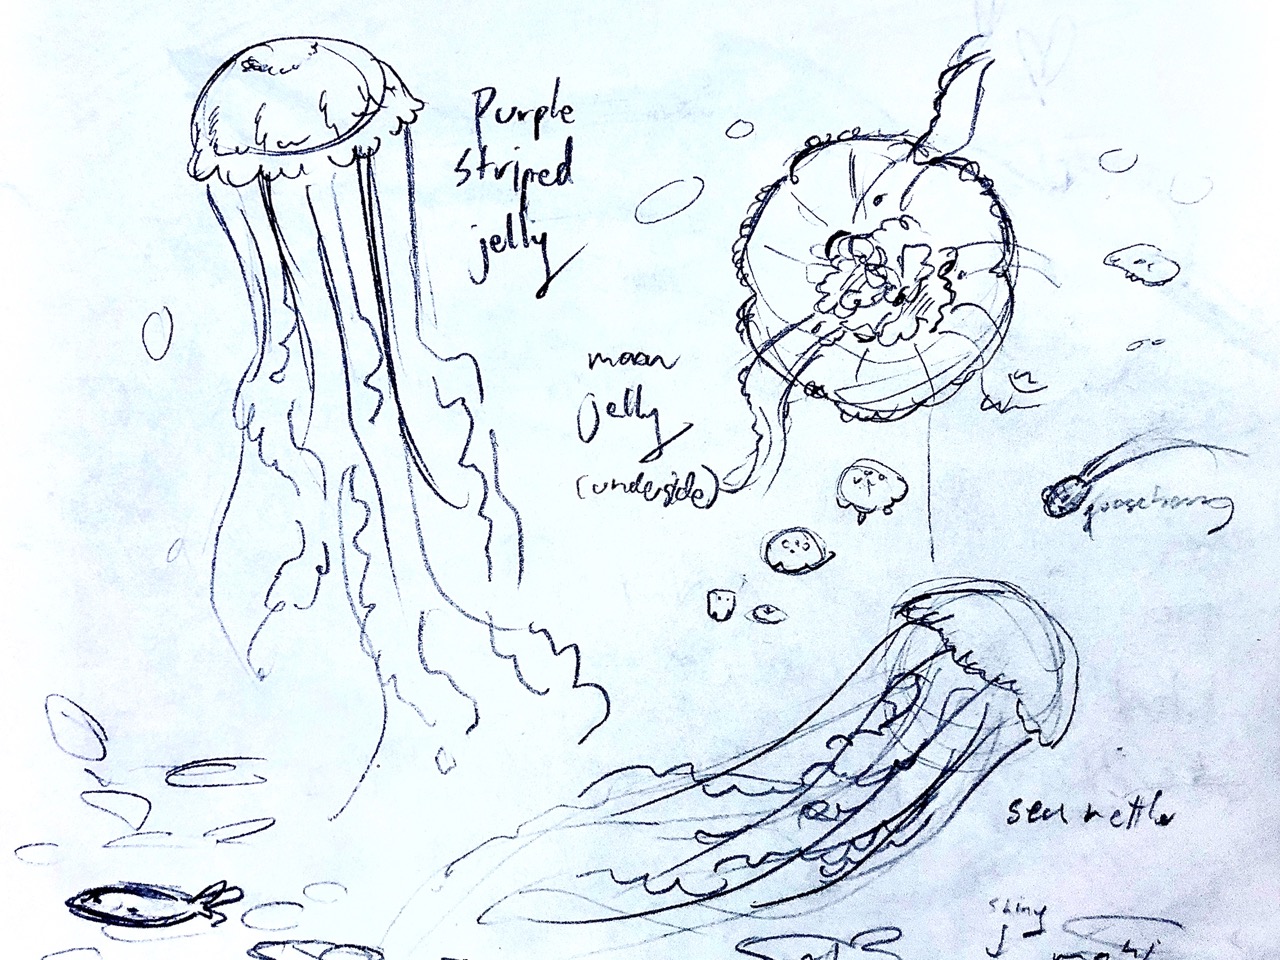 every image in this page is a pencil sketch edited to be more legible on a screen. this one shows sketches of a purple striped jellyfish, a sea nettle, and the underside of a moon jelly. there's a very slight indigo tint.